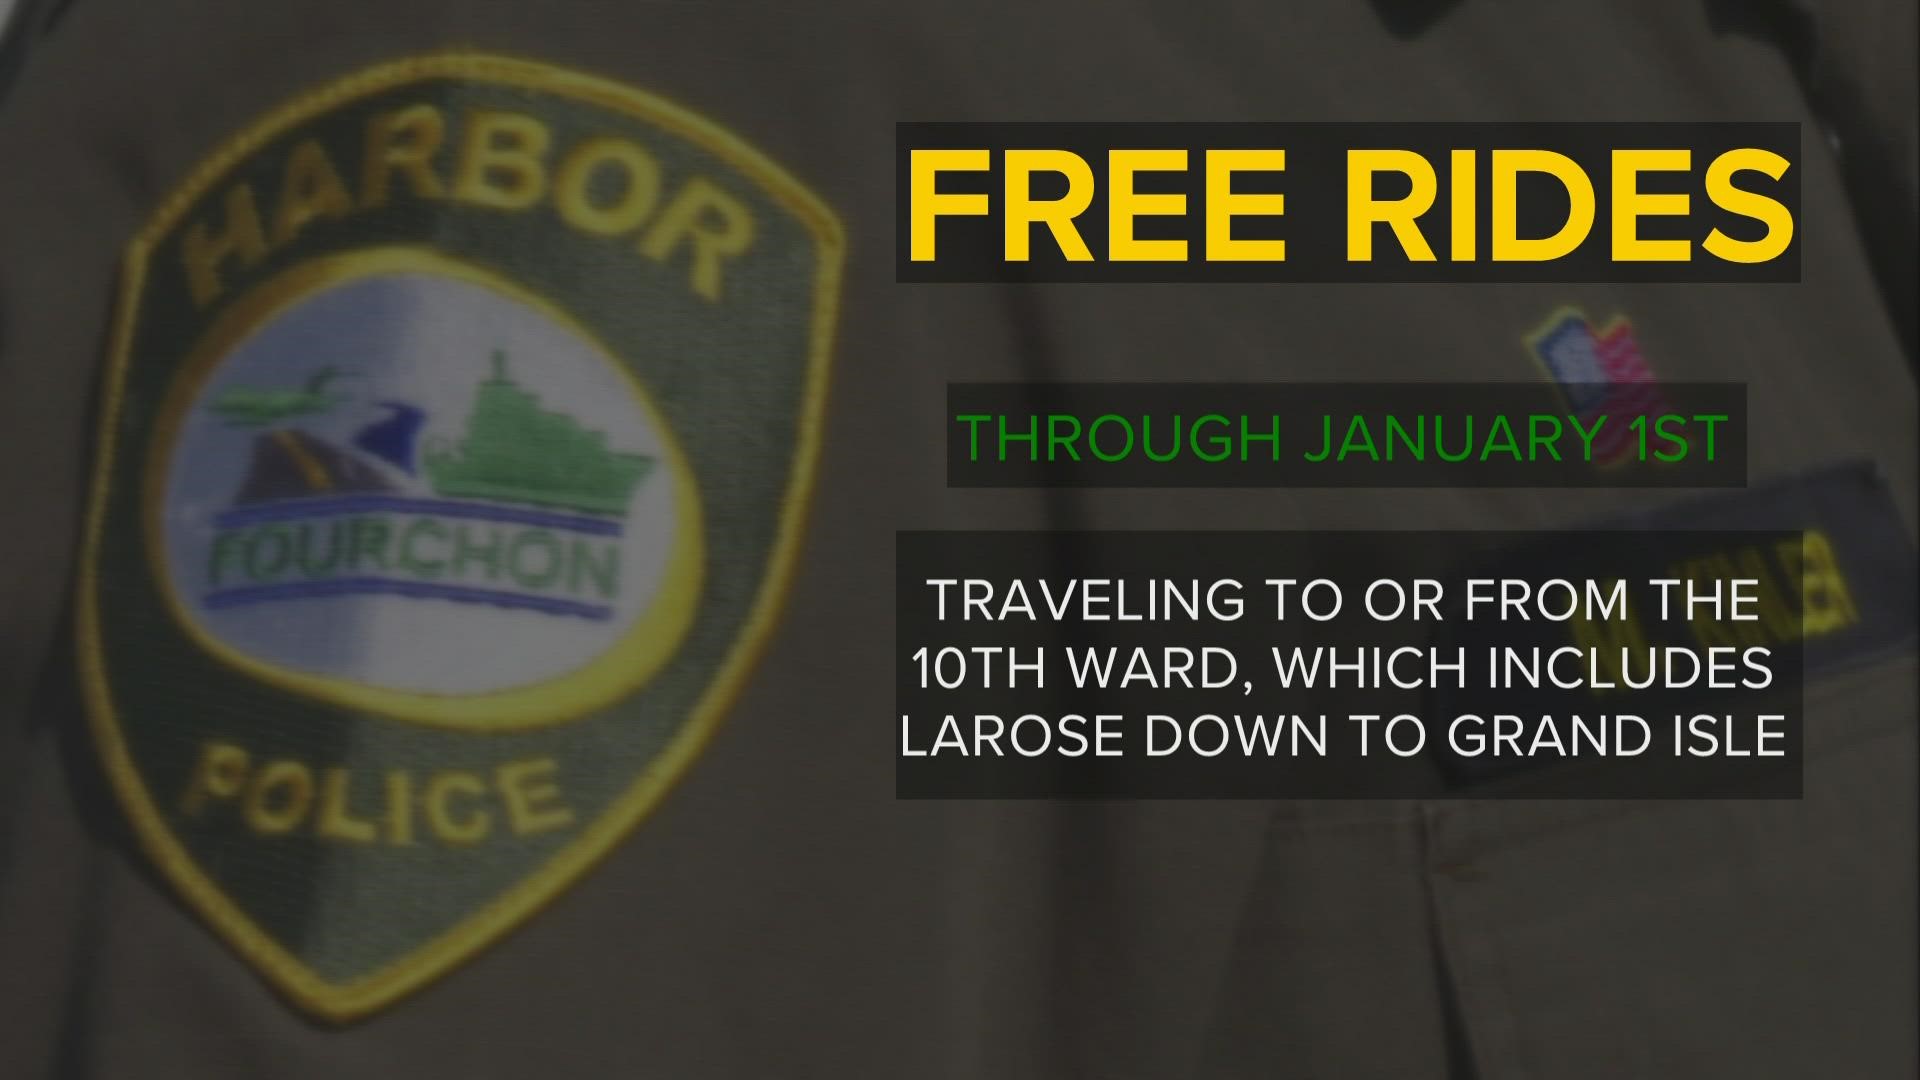 To prevent further deaths from drunk driving this holiday, Officers in Lafourche are offering rides to those too intoxicated no questions asked.